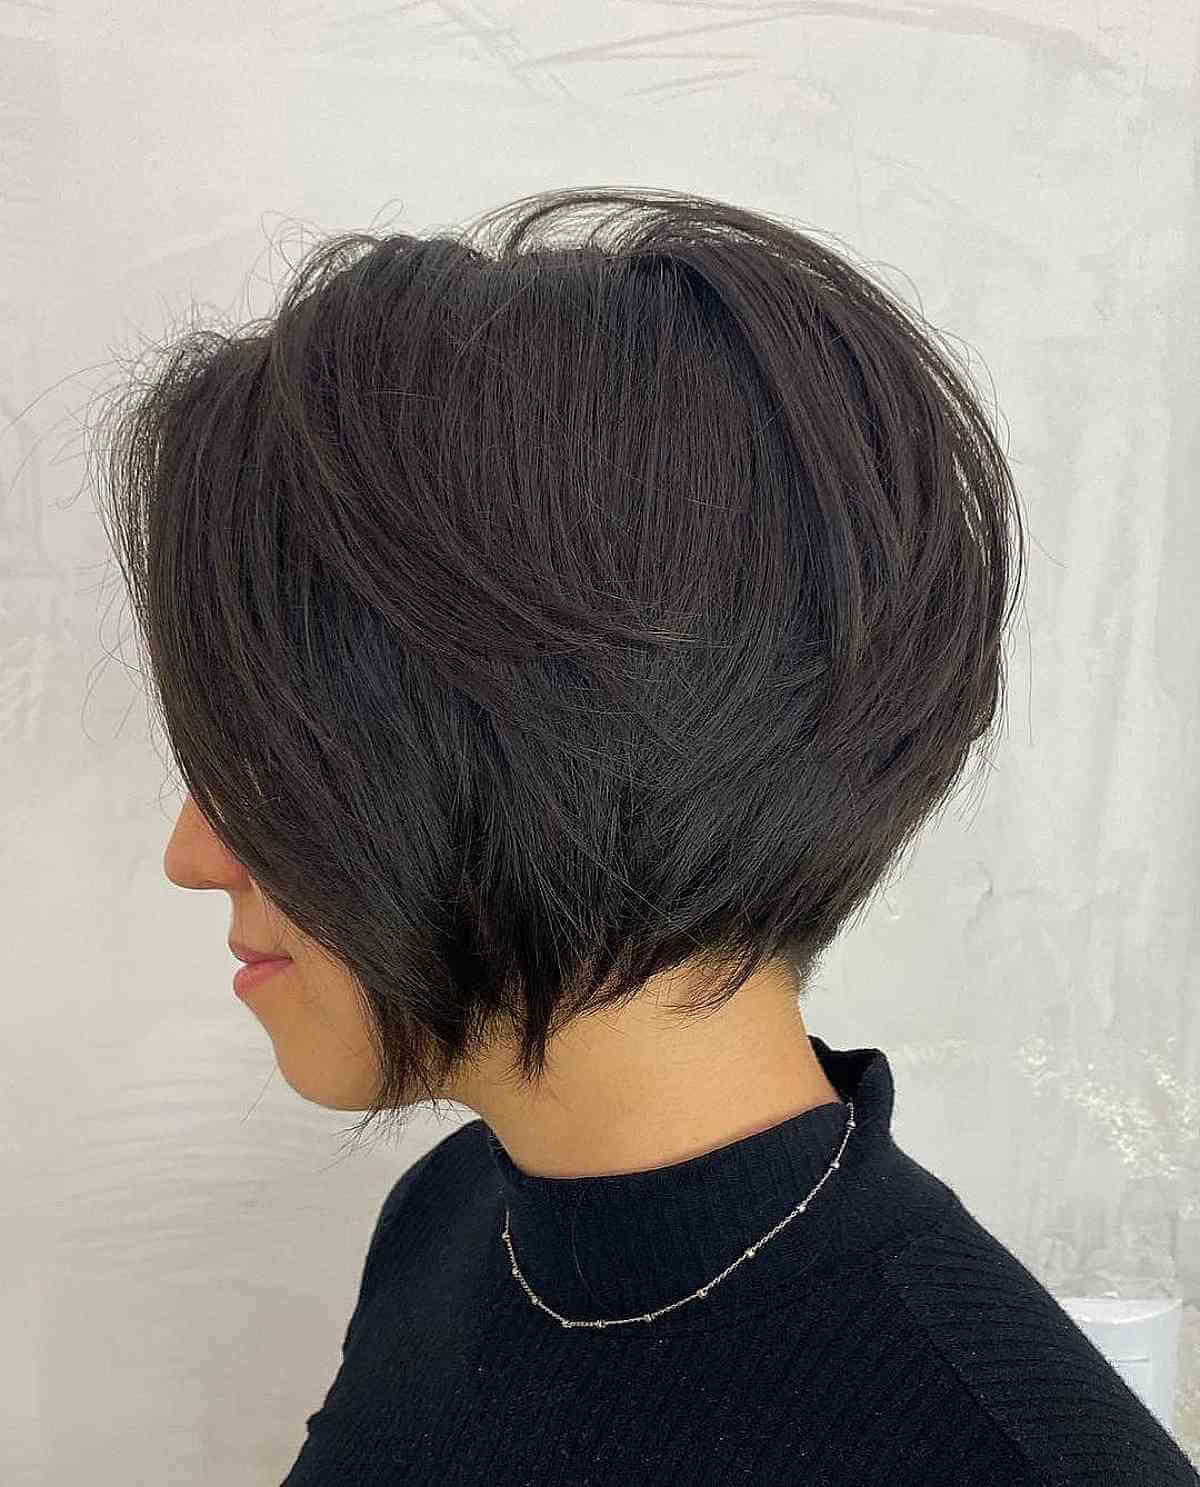 Chin-length stacked bob for easy-care thick hair